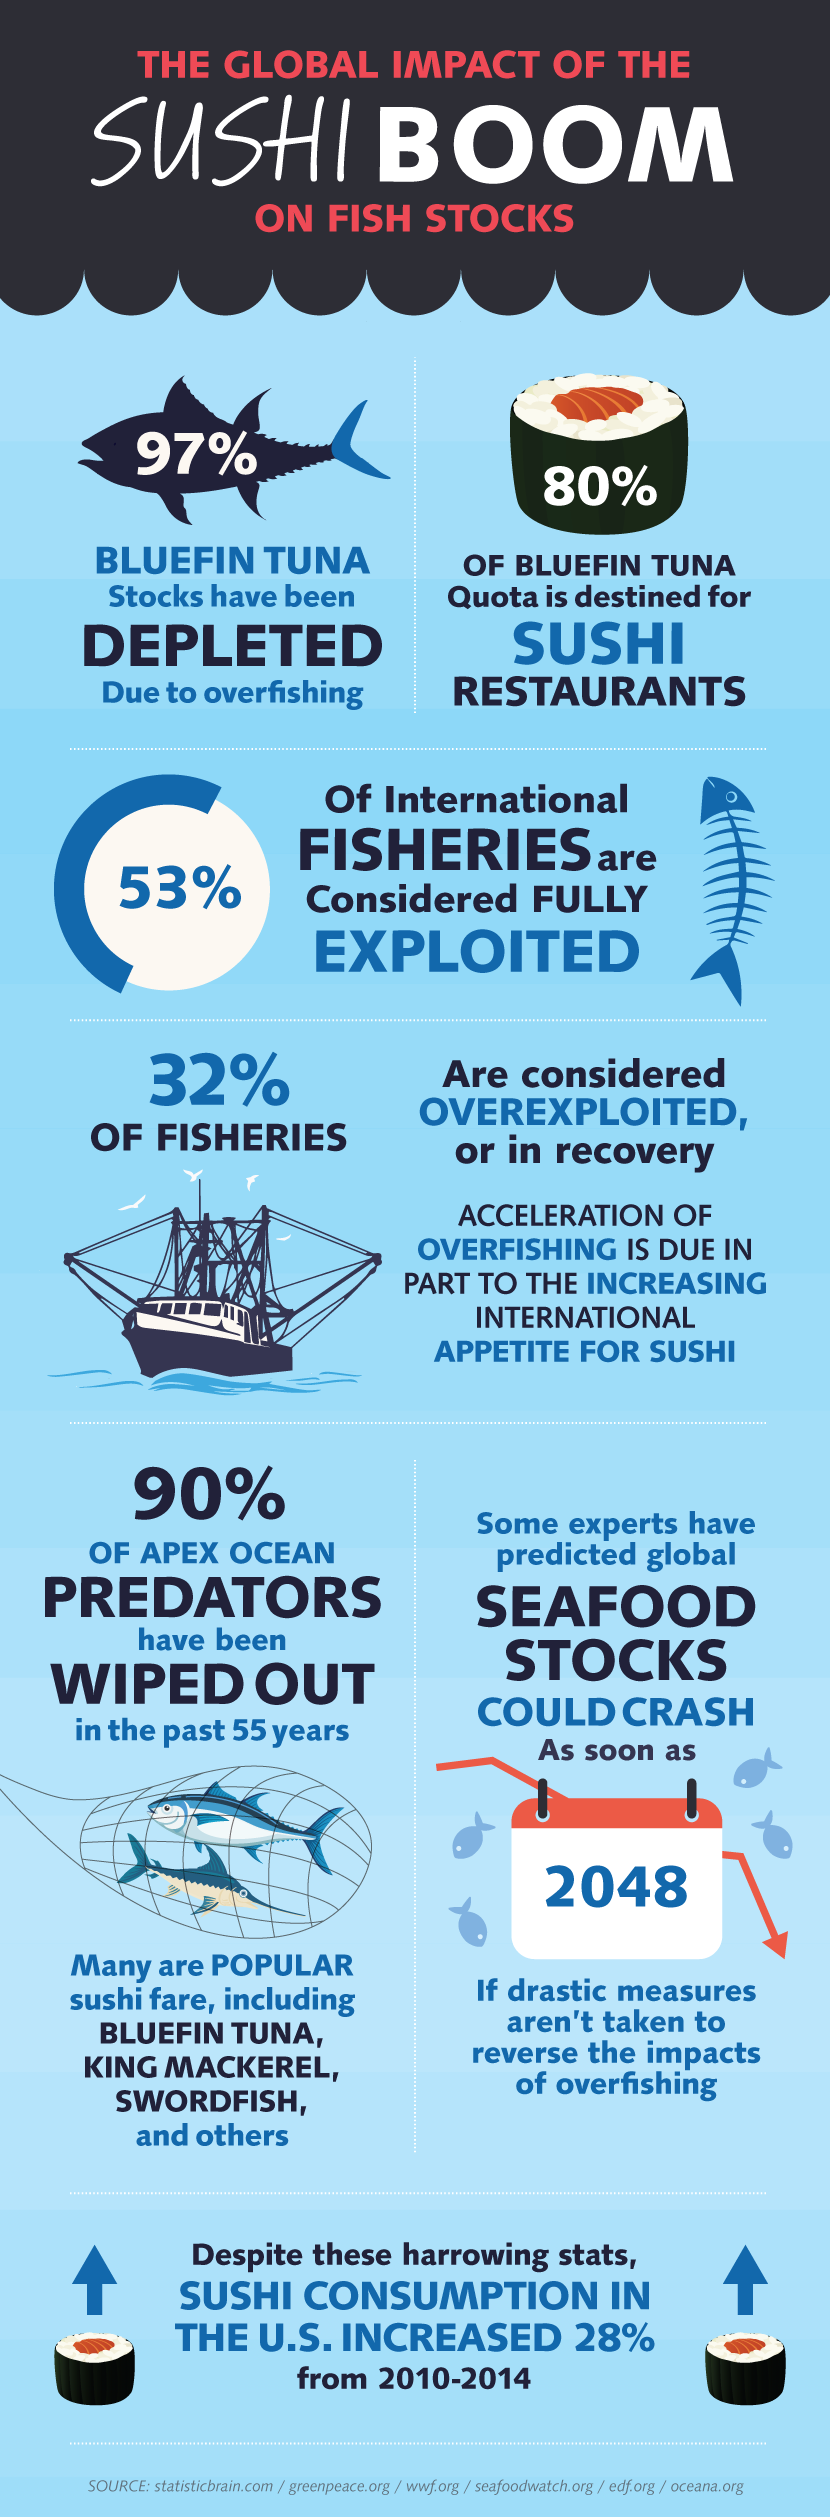 The Global Impact of the Sushi Boom on Fish Stocks - Sustainable Sushi